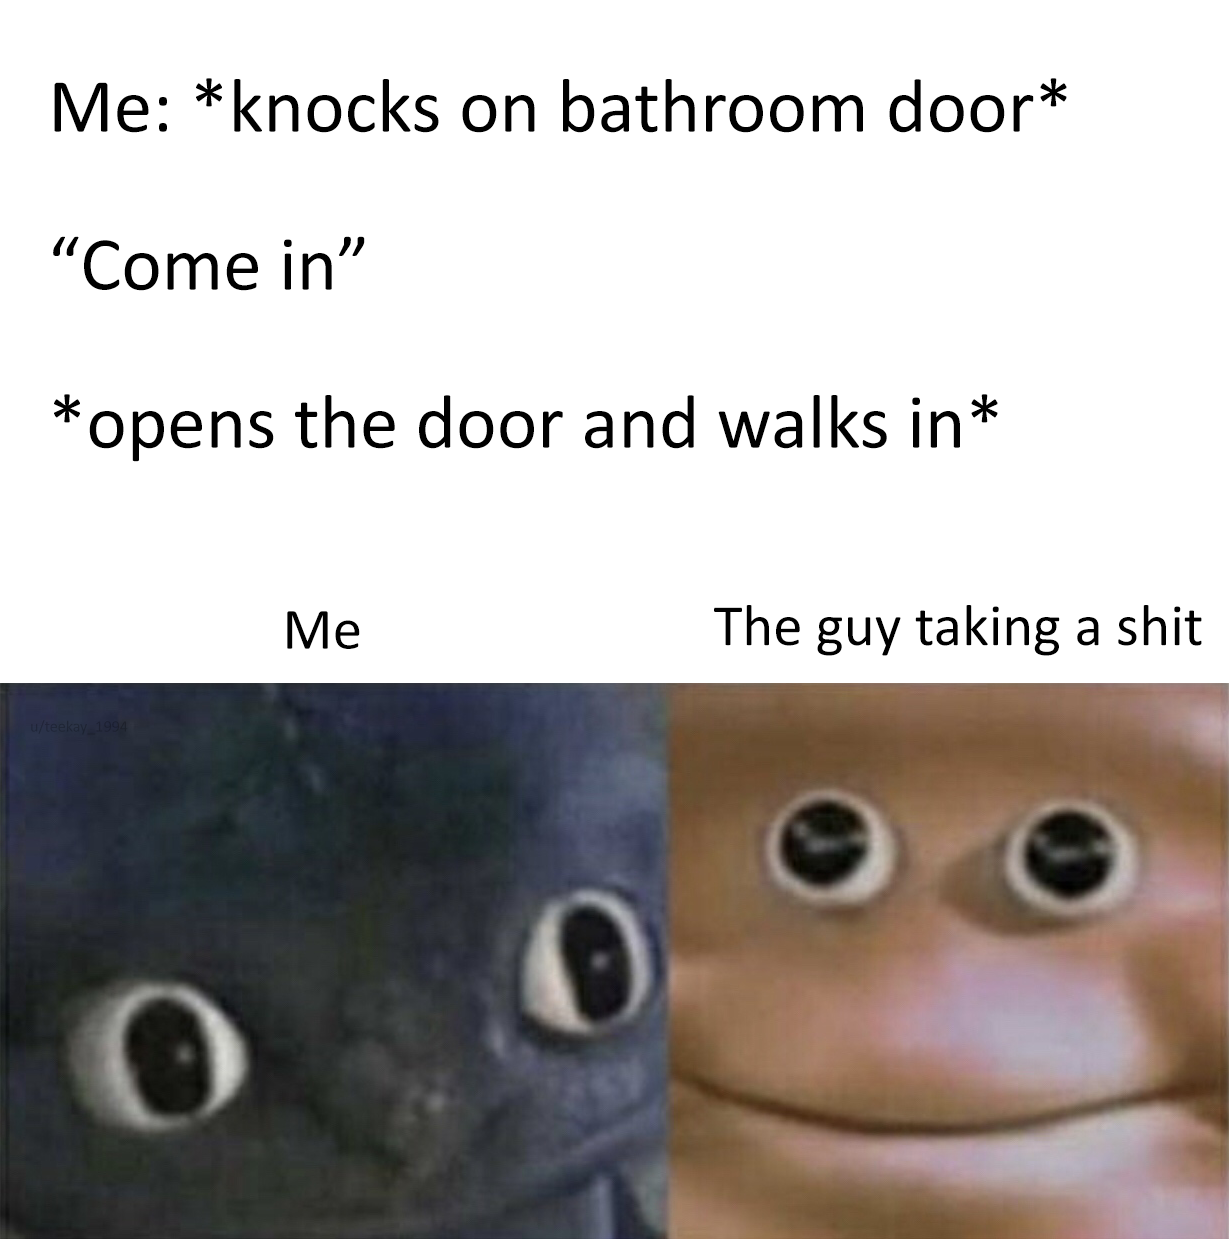 you get cornered by the school bully - Me knocks on bathroom door "Come in" opens the door and walks in Me The guy taking a shit